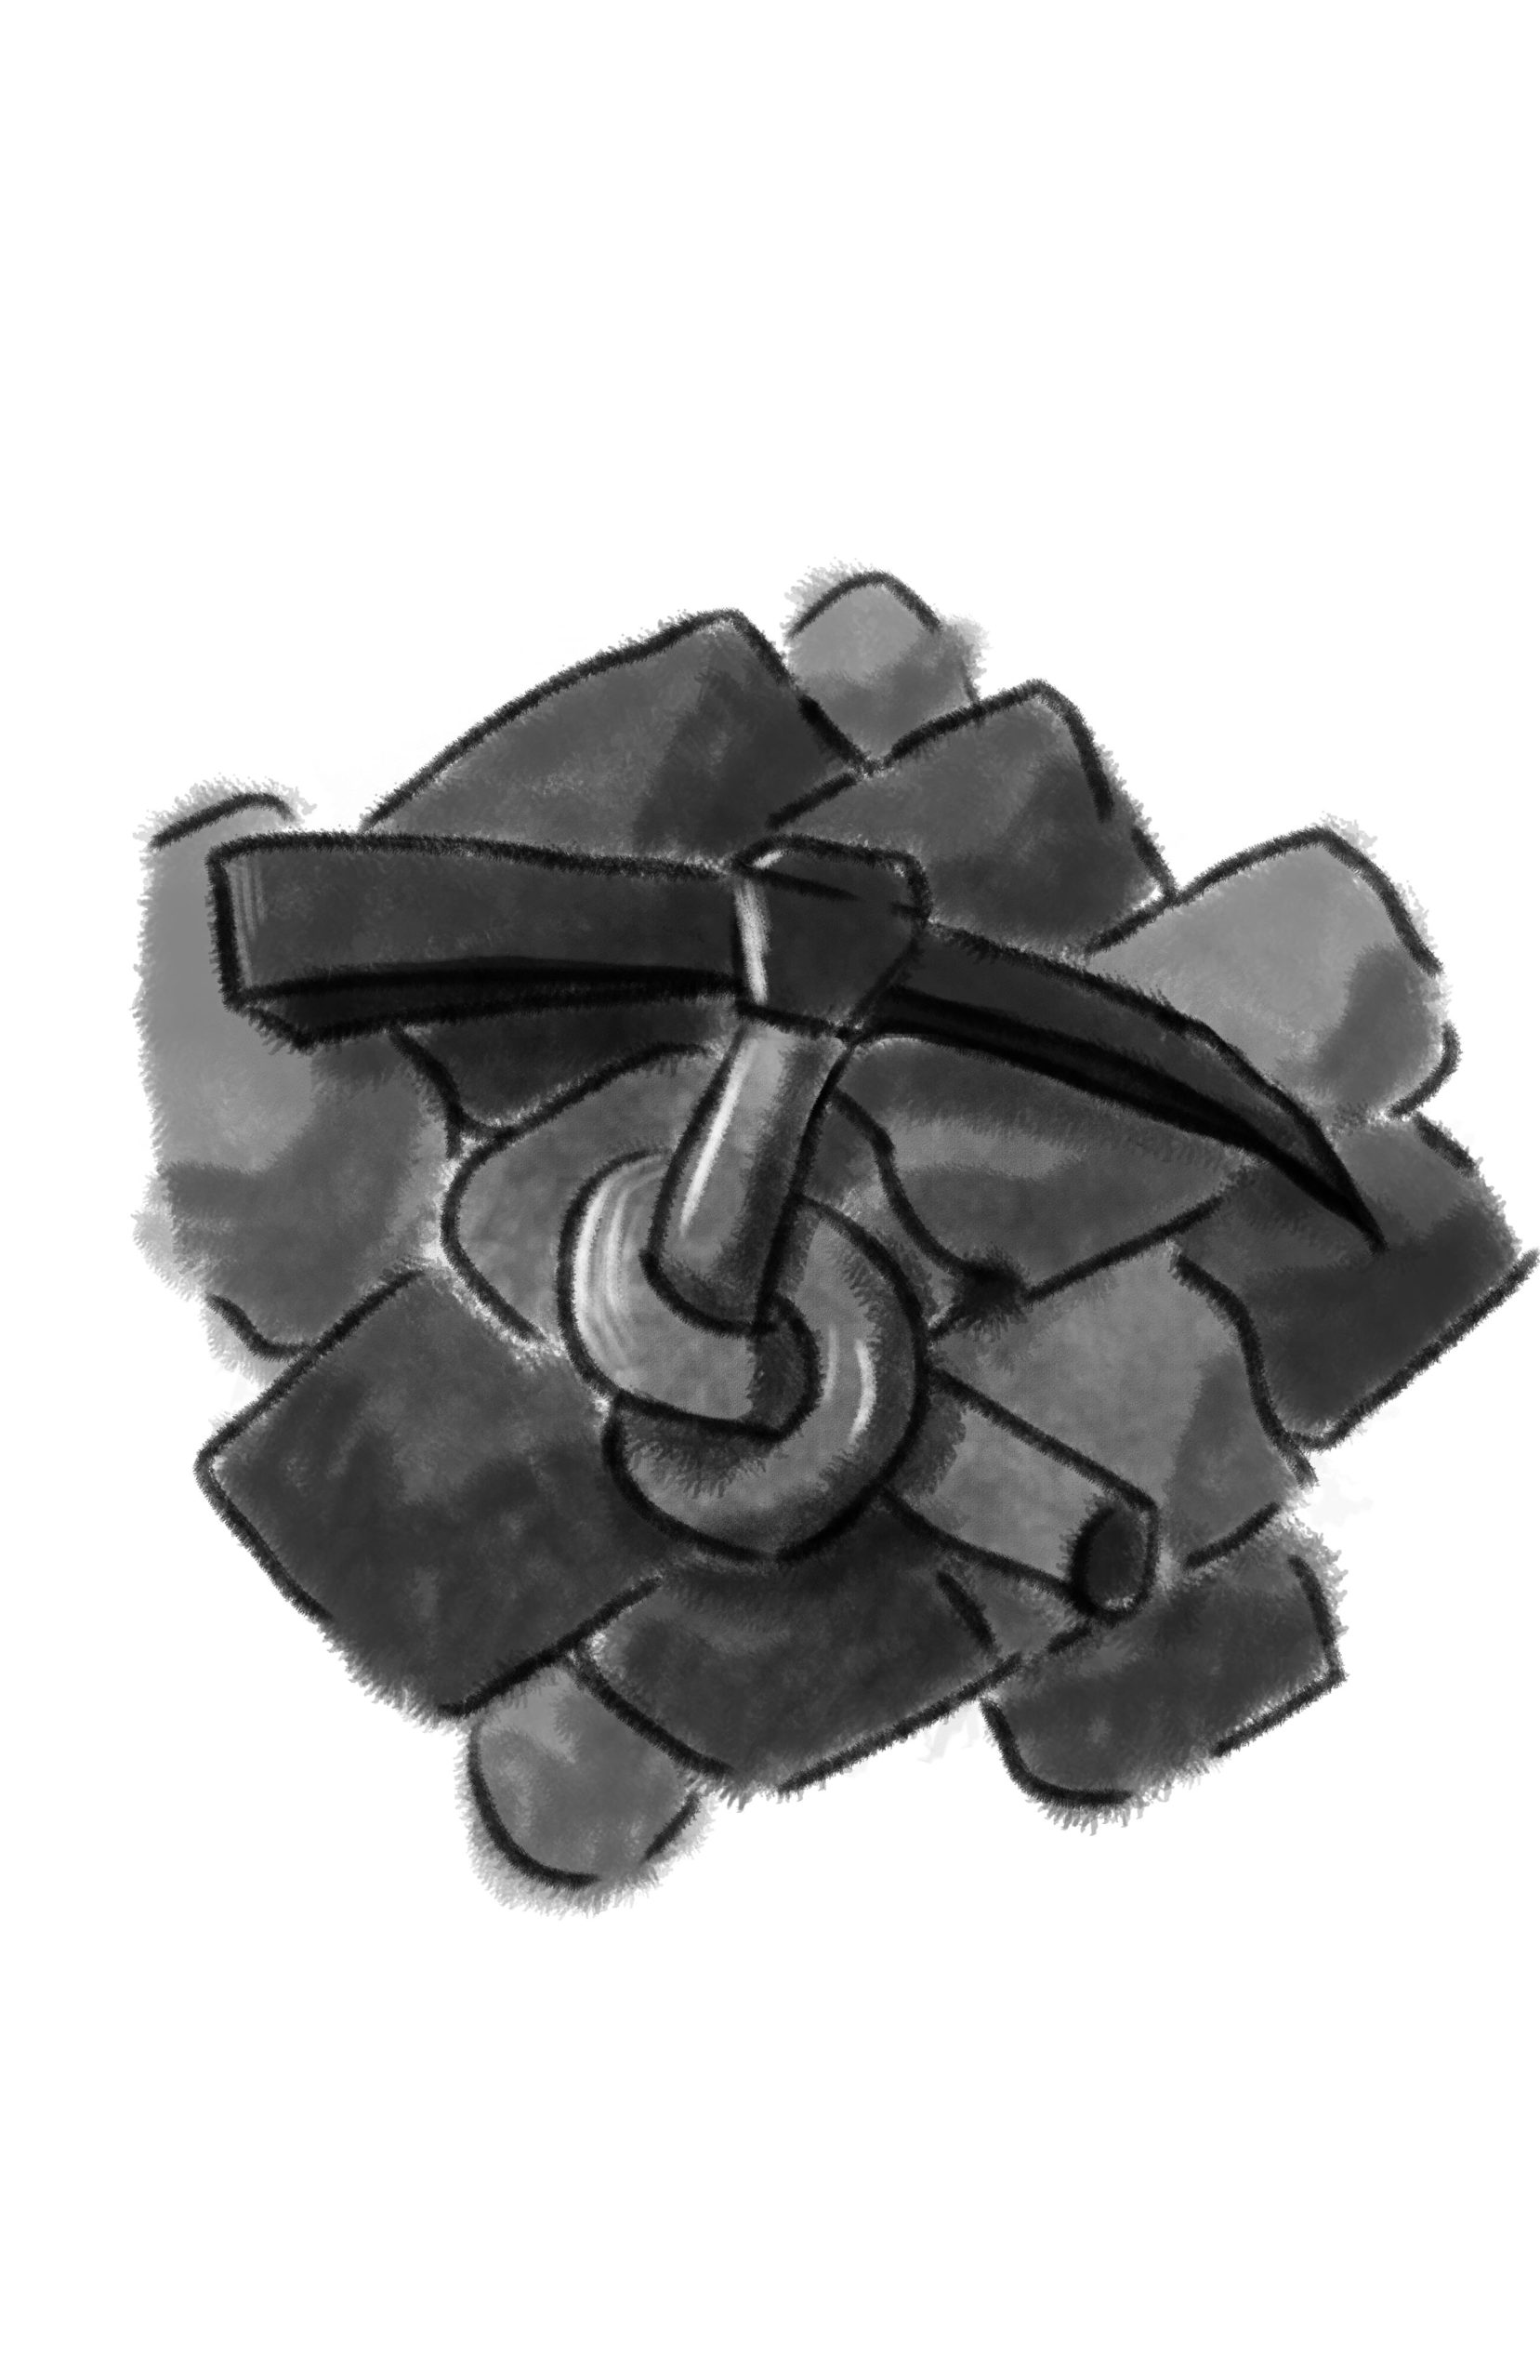 A pickaxe with its handle tied in a knot.